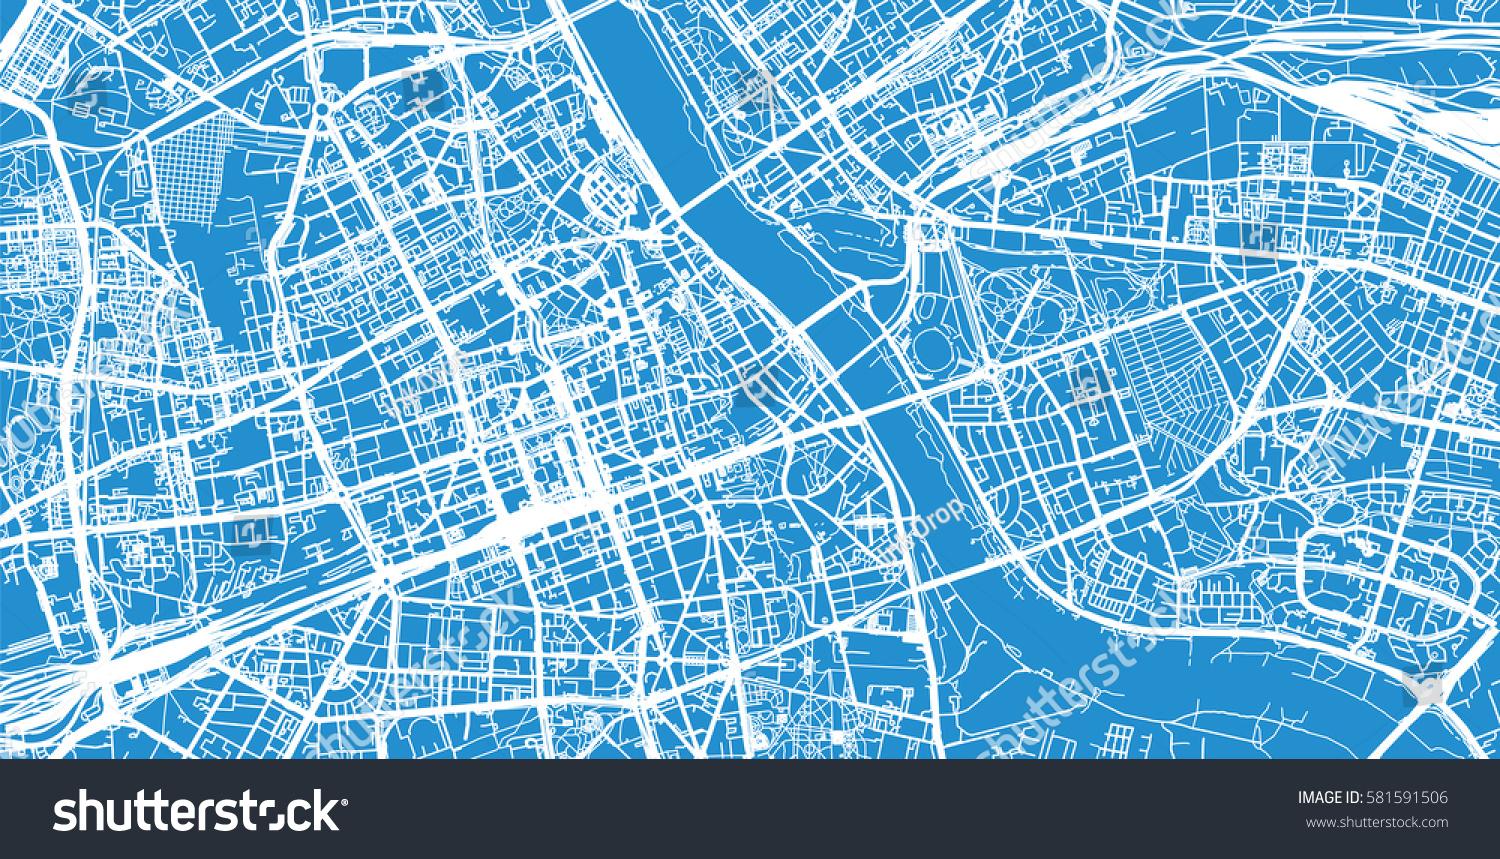 Vector city map of Warsaw, Poland #581591506